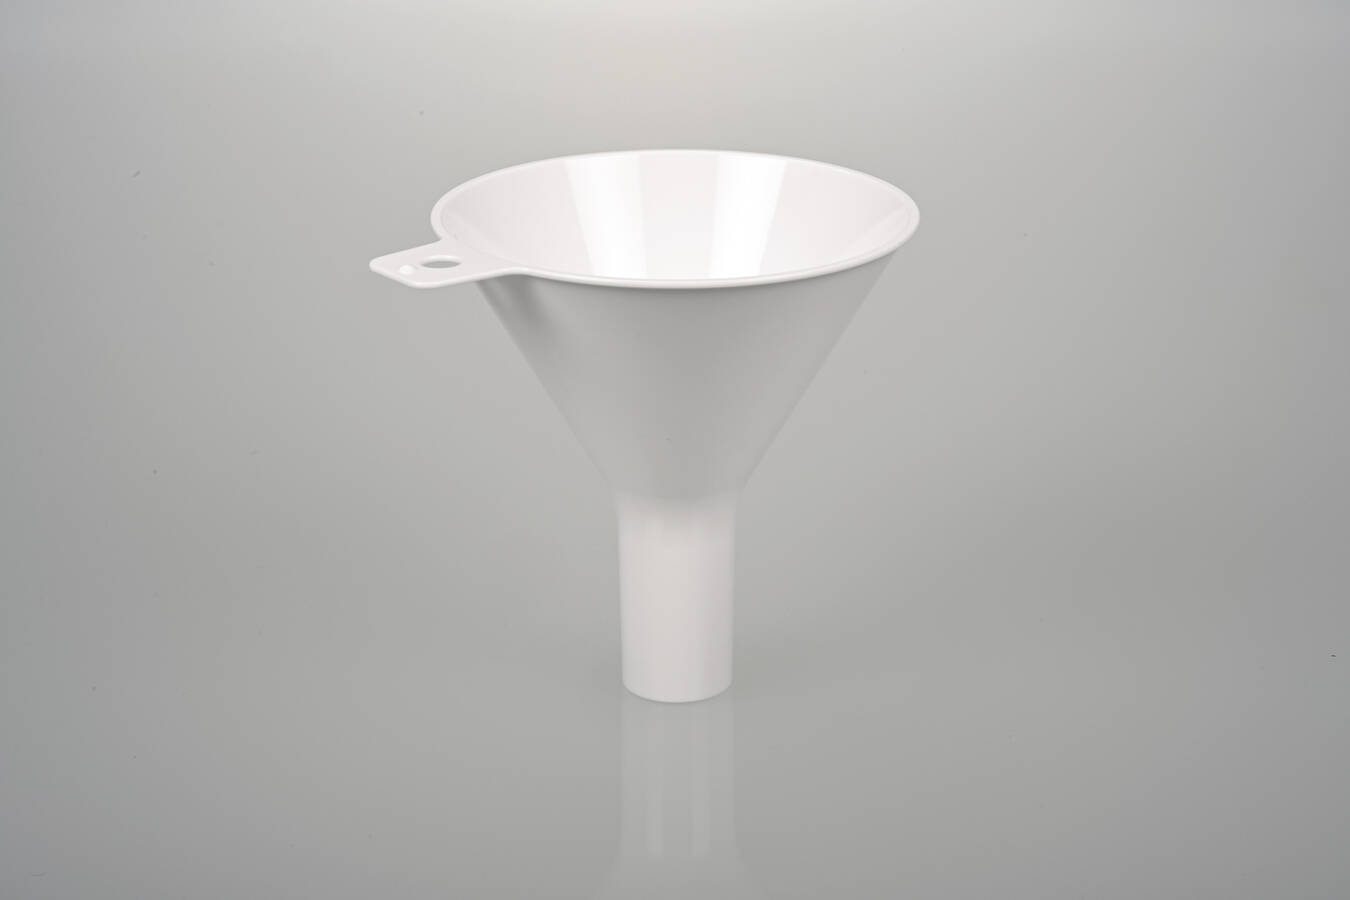 New Bürkle disposable powder funnel  Practical and hygienic filling aid for powders and granules - for all areas where special cleanliness is required